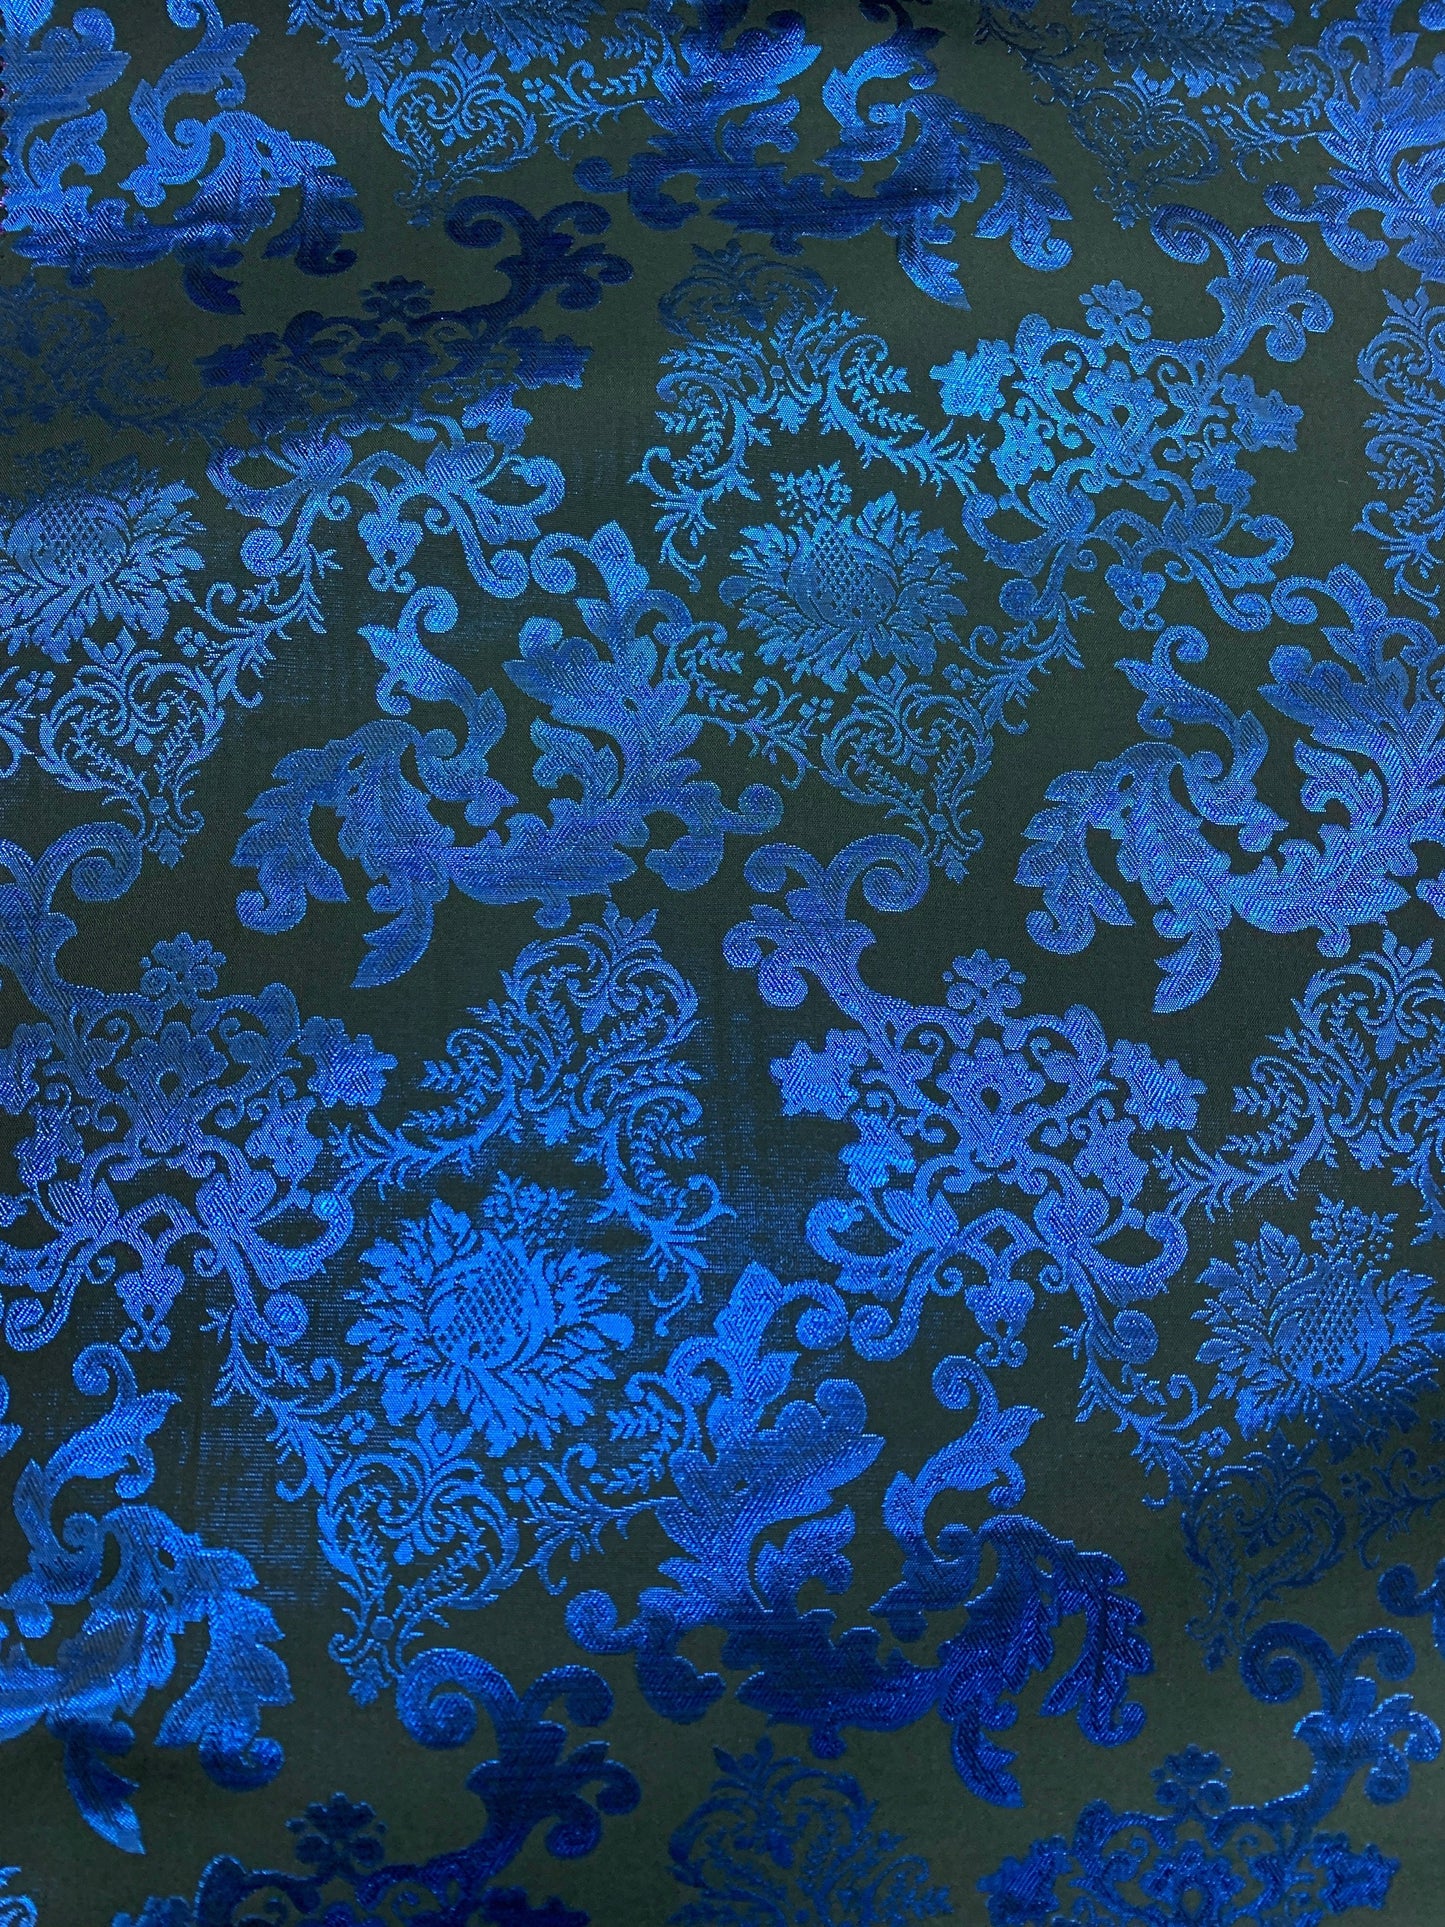 ROYAL BLUE BLACK Damask Metallic Brocade Fabric (58 in.) Sold By The Yard